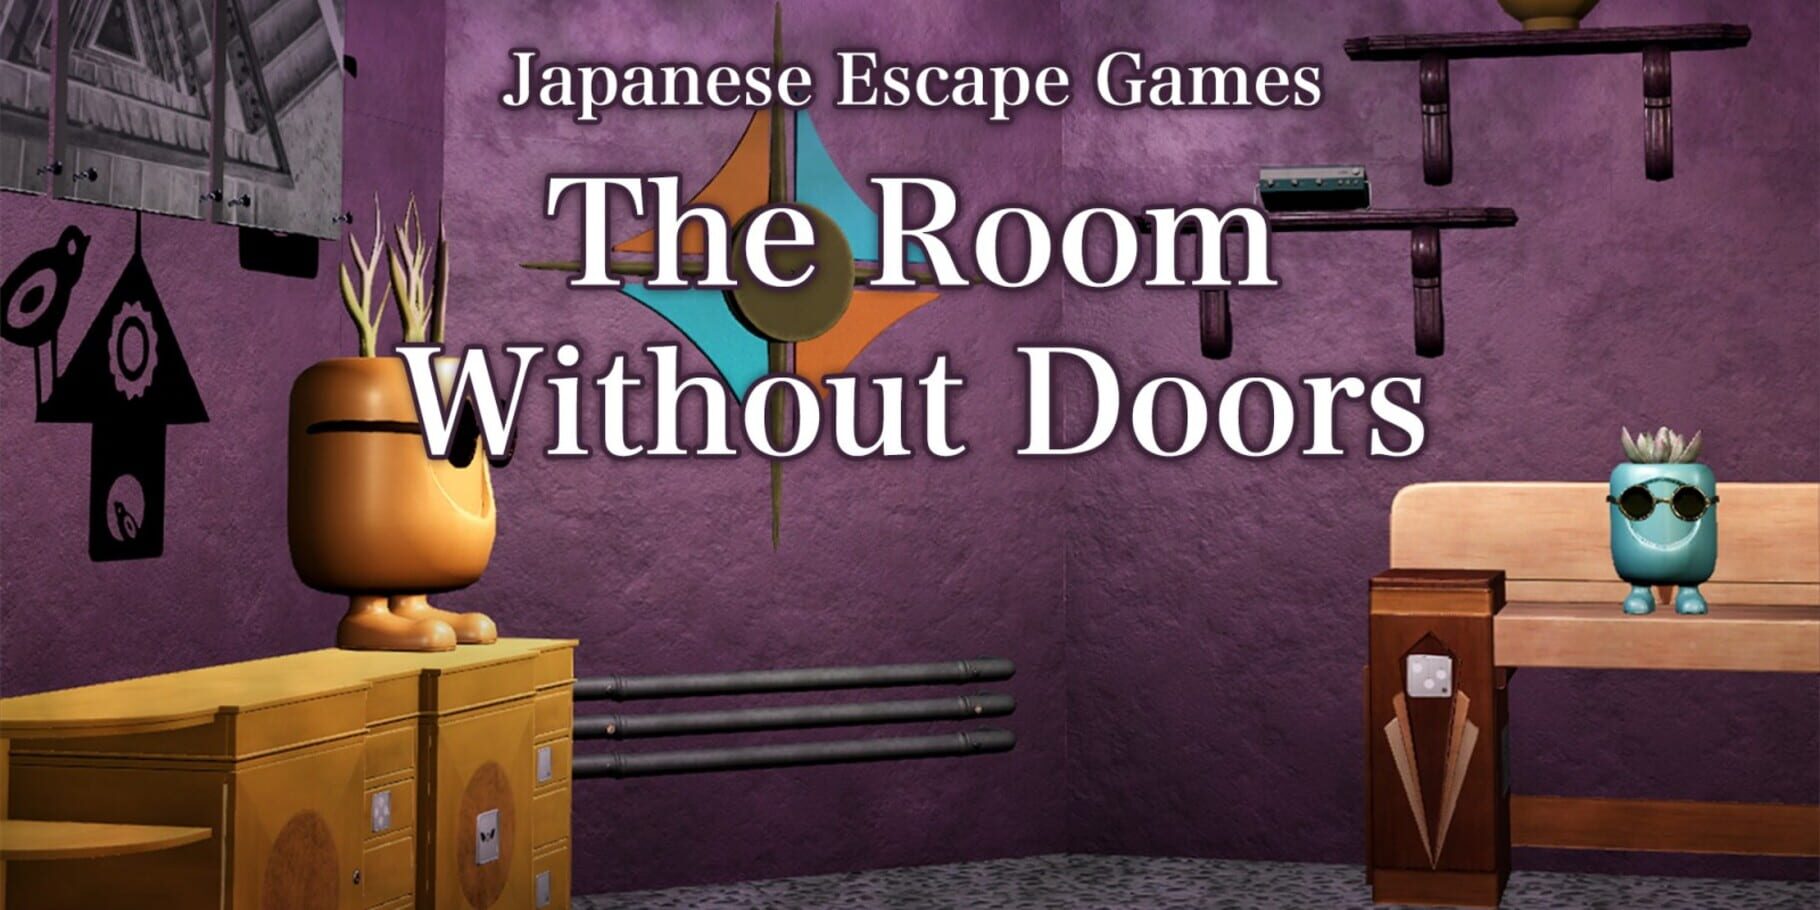 Japanese Escape Games: The Room Without Doors artwork